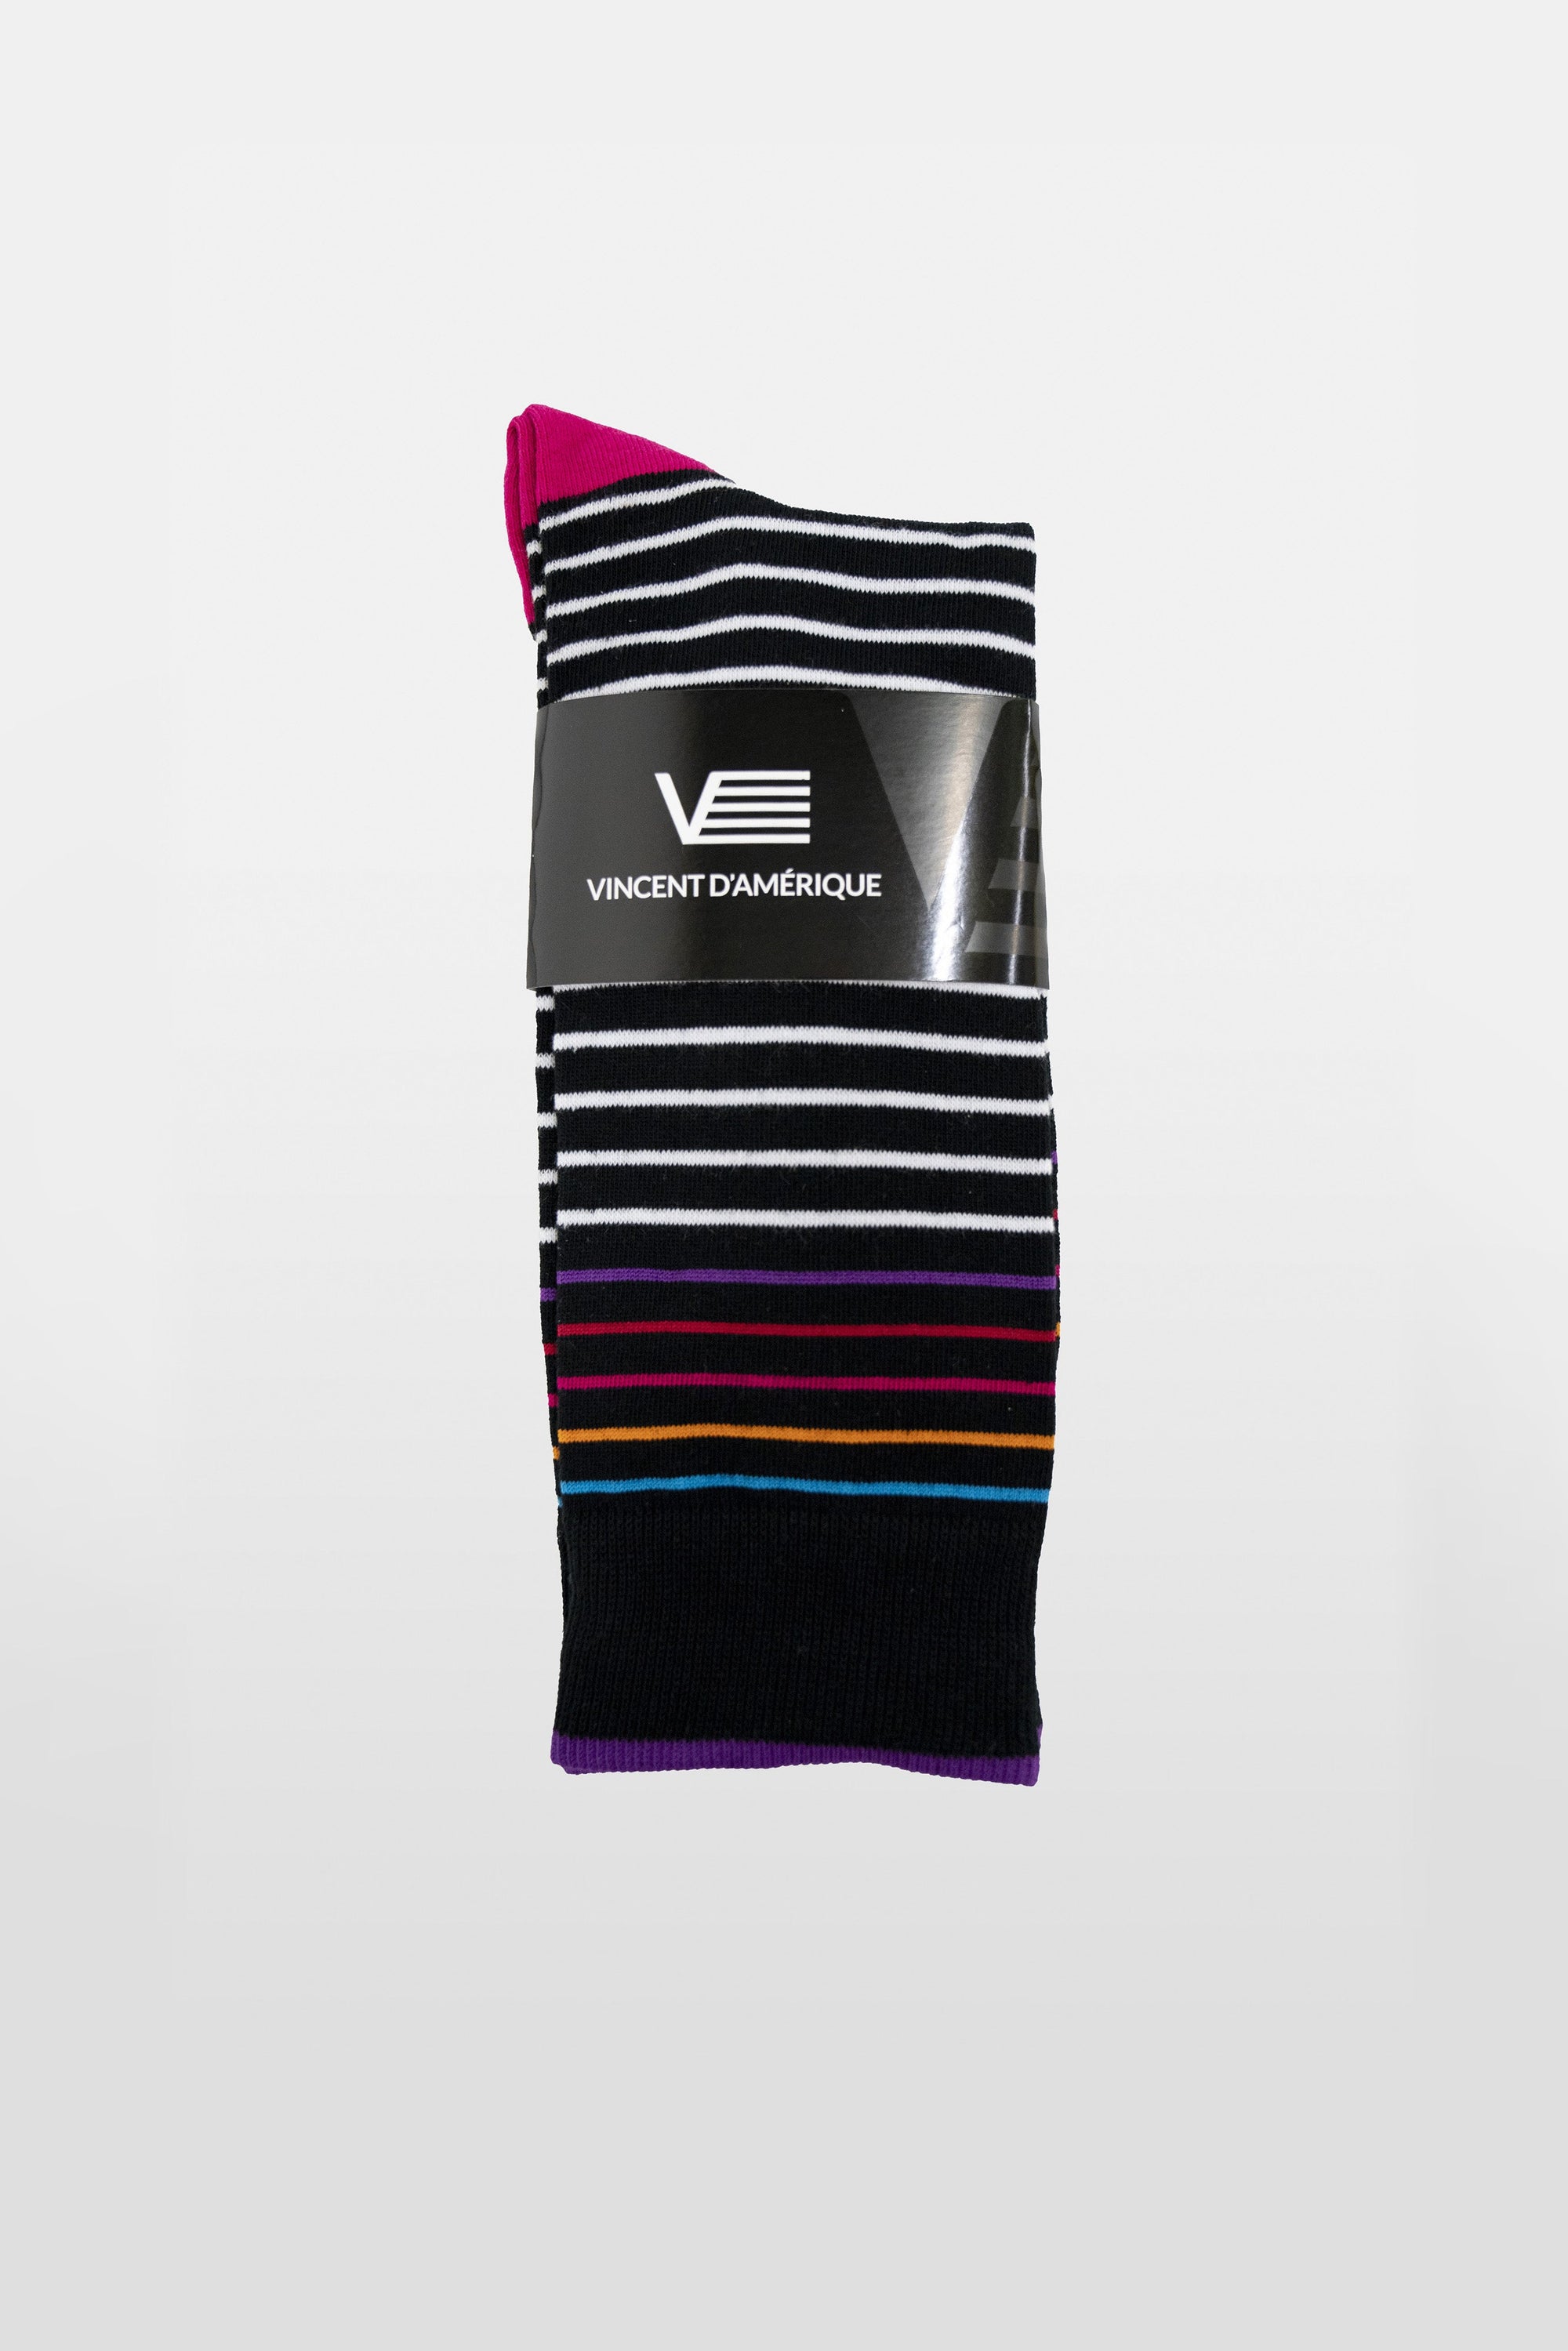 Black socks with multicolored patterns